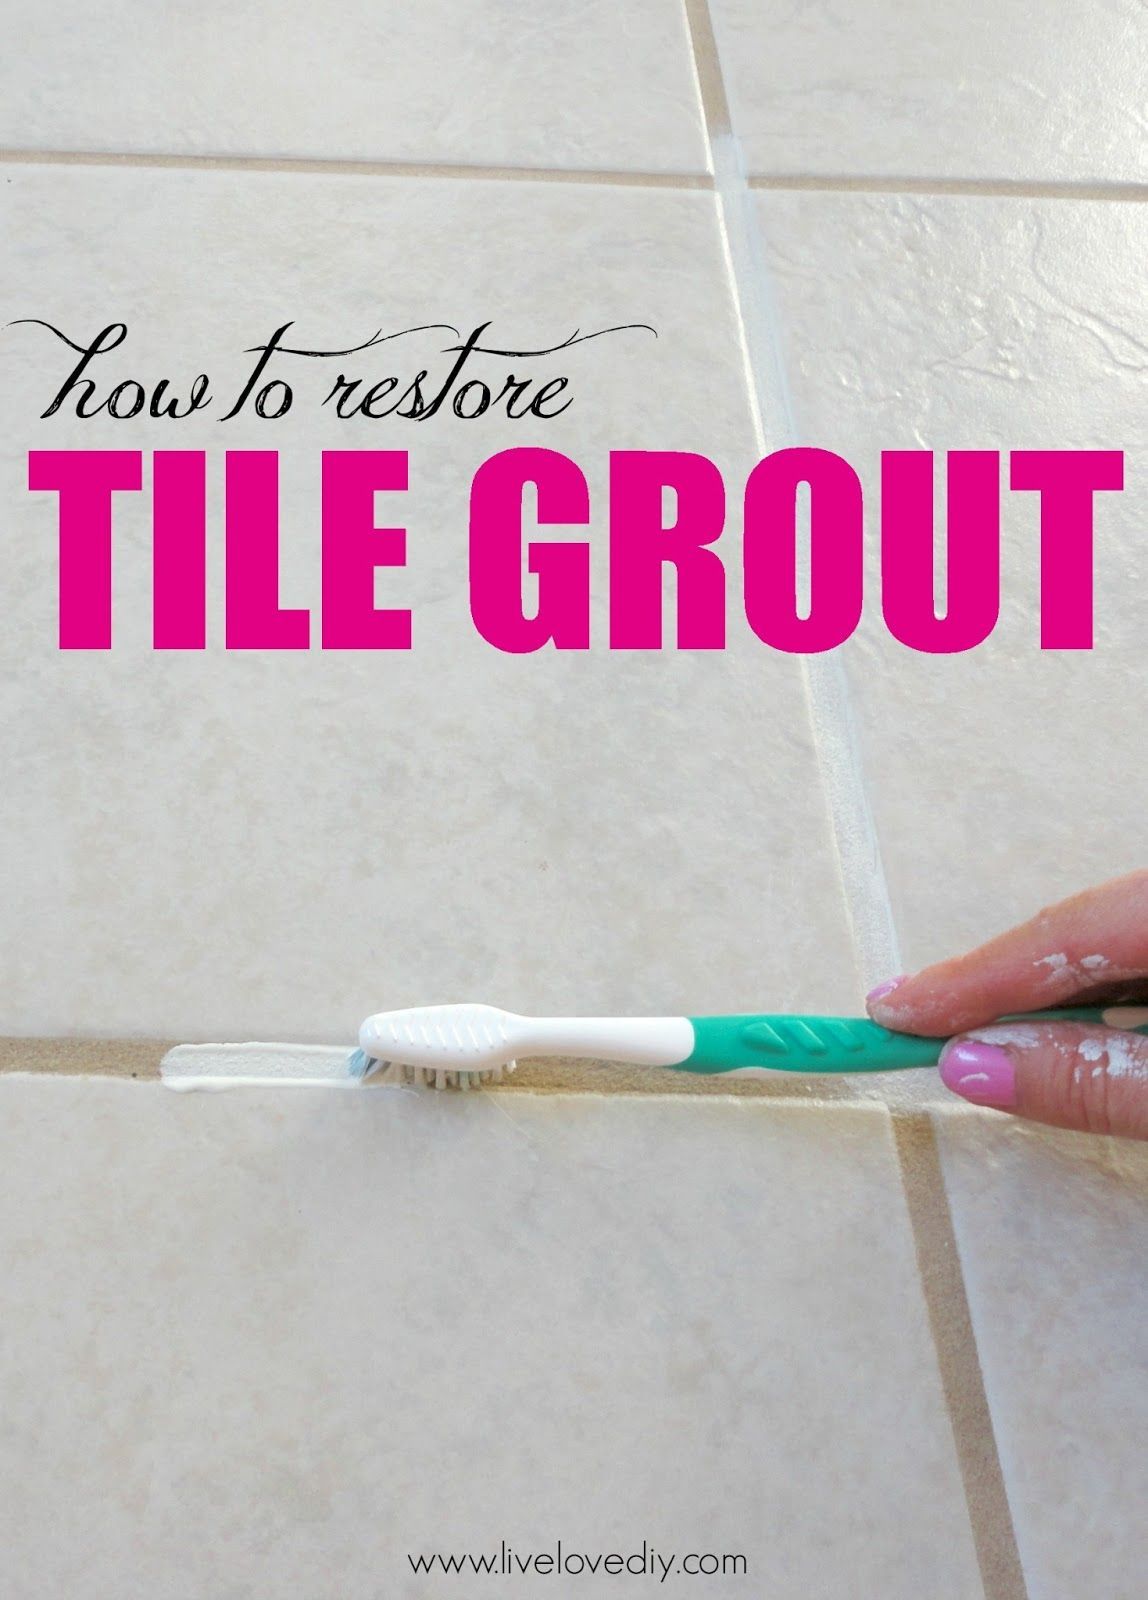 10 Home Improvement Ideas: how to make the most of what you already have (like the secret to restoring your dirty tile grout!) This is so